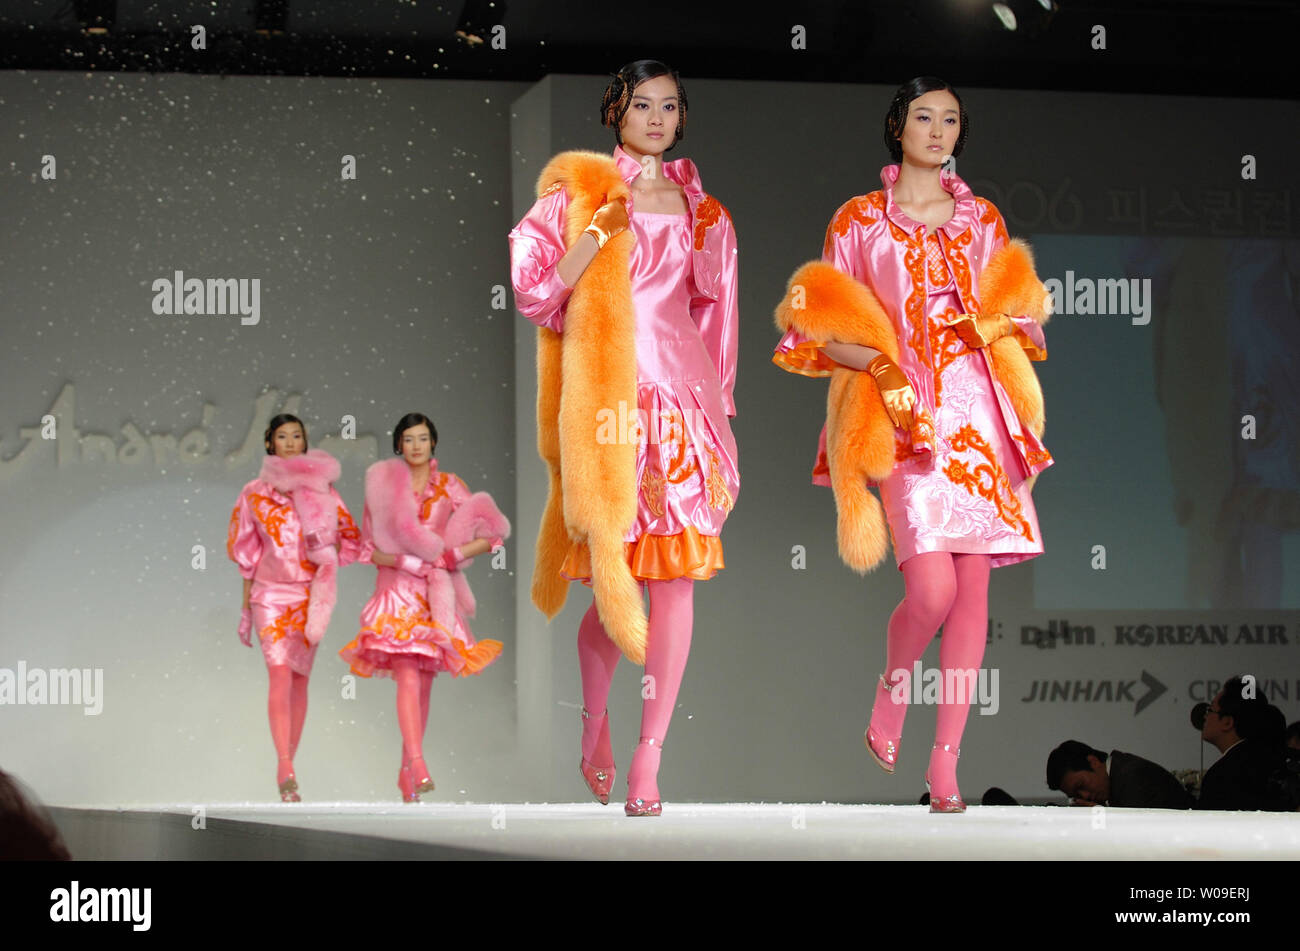 Models walk down the catwalk wearing a creation by Andre Kim during a fashion show as part of the opening ceremony of the 2006 Peace Queen Cup (soccer) in Seoul, South Korea on October 27 2006.    (UPI Photo/Keizo Mori) Stock Photo